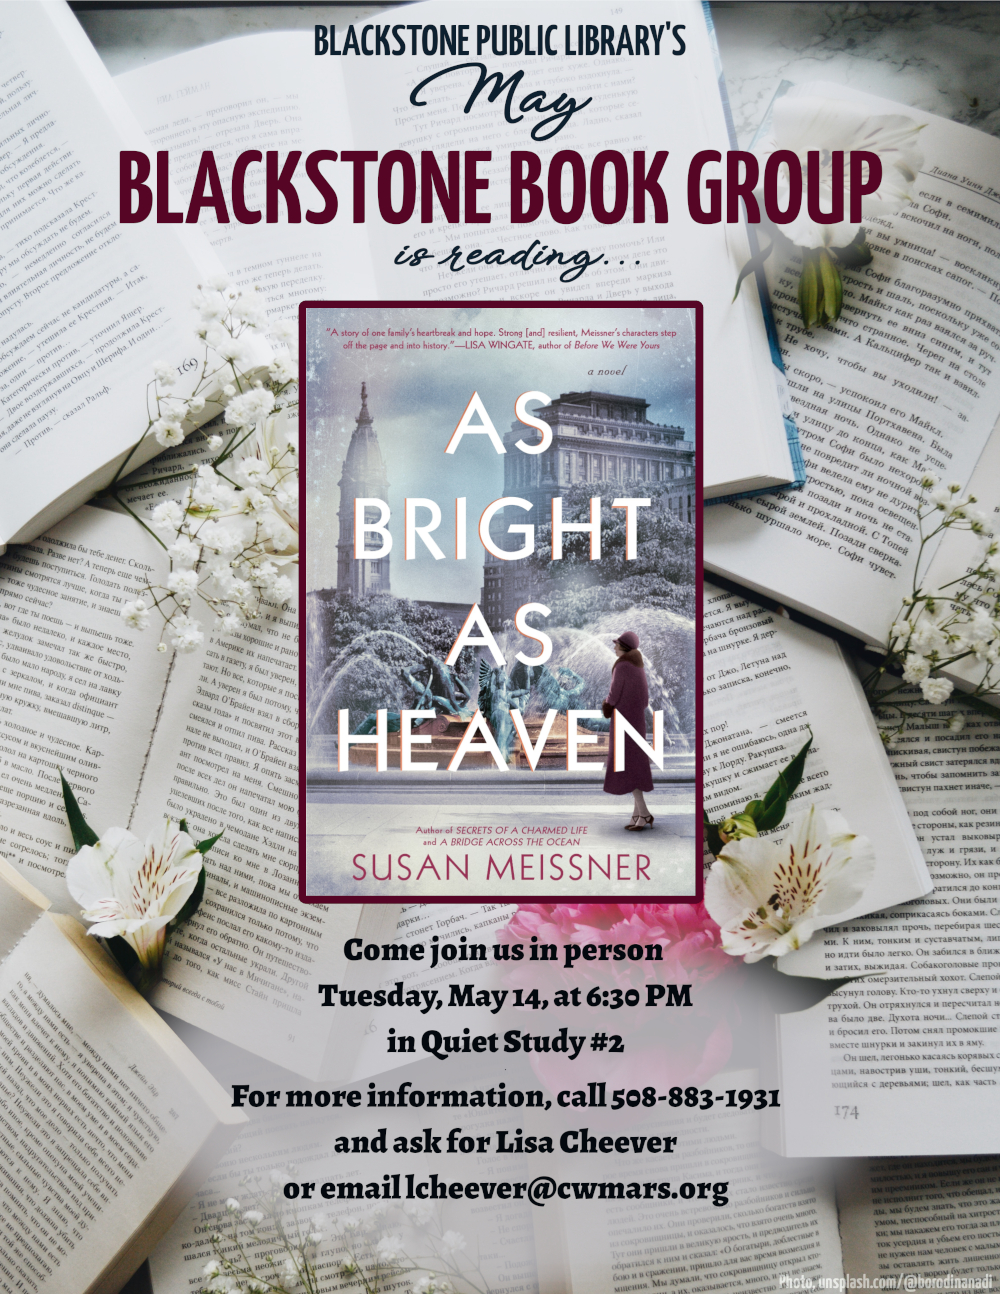 Blackstone Public Library’s May Blackstone Book Group is reading "As Bright As Heaven" a novel by Susan Meissner.  Come join us in person Tuesday, May 14, at 6:30 PM in Quiet Study #2.   For more information, call 508-883-1931 and ask for Lisa Cheever or email lcheever@cwmars.org.  Image description: The title text is in a bold white sans-serif font with a red drop-shadow. Behind the text is the image of a city skyline in the background, with trees and a fountain sculpture in the foreground. A woman stands in front of the fountain wearing a full-length maroon coat with a fur collar and a matching hat.